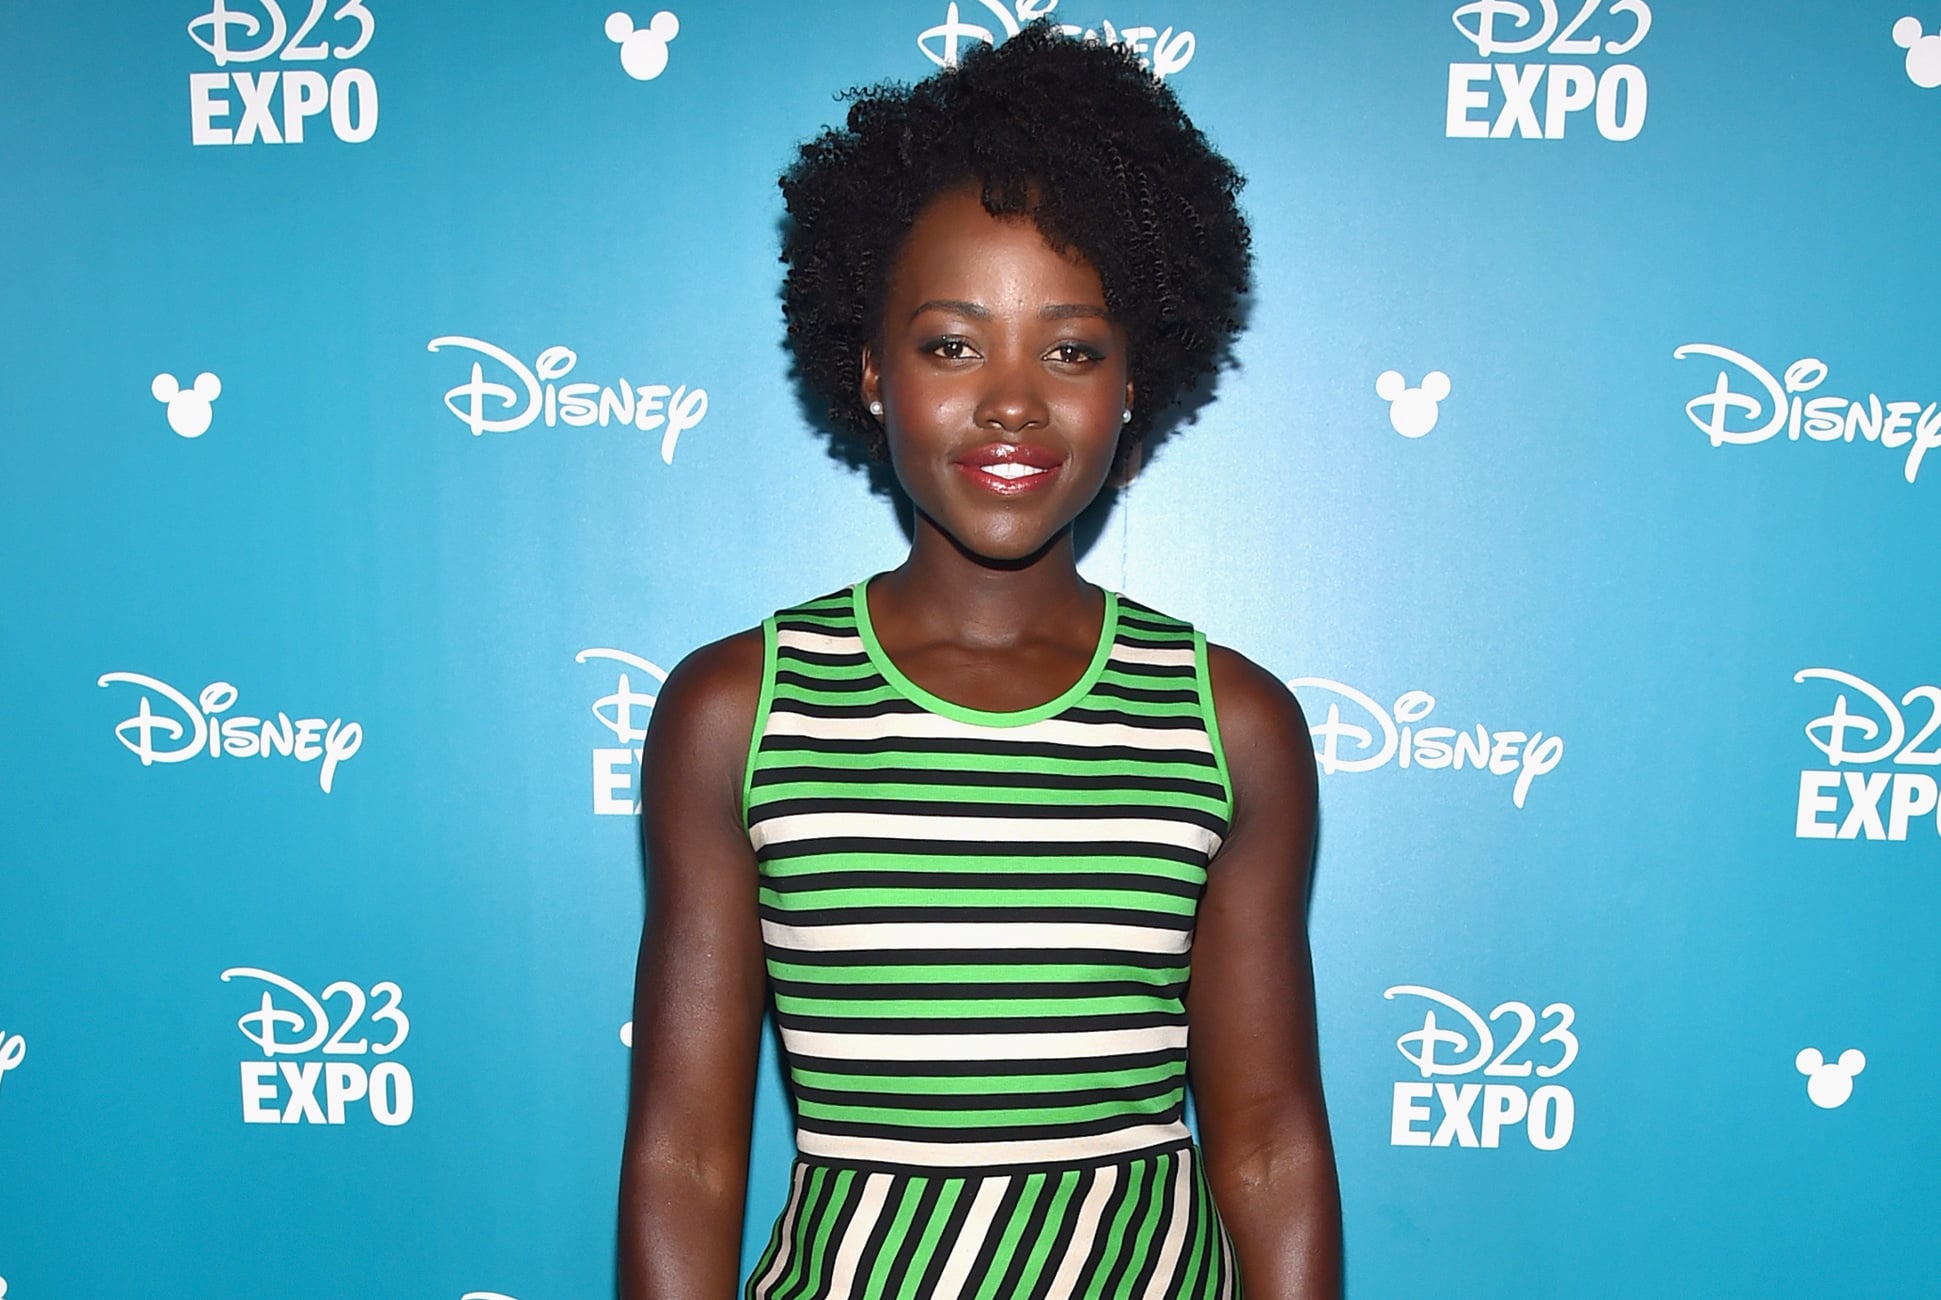 Who Does Lupita Nyong'o Play in Star Wars The Force Awakens?